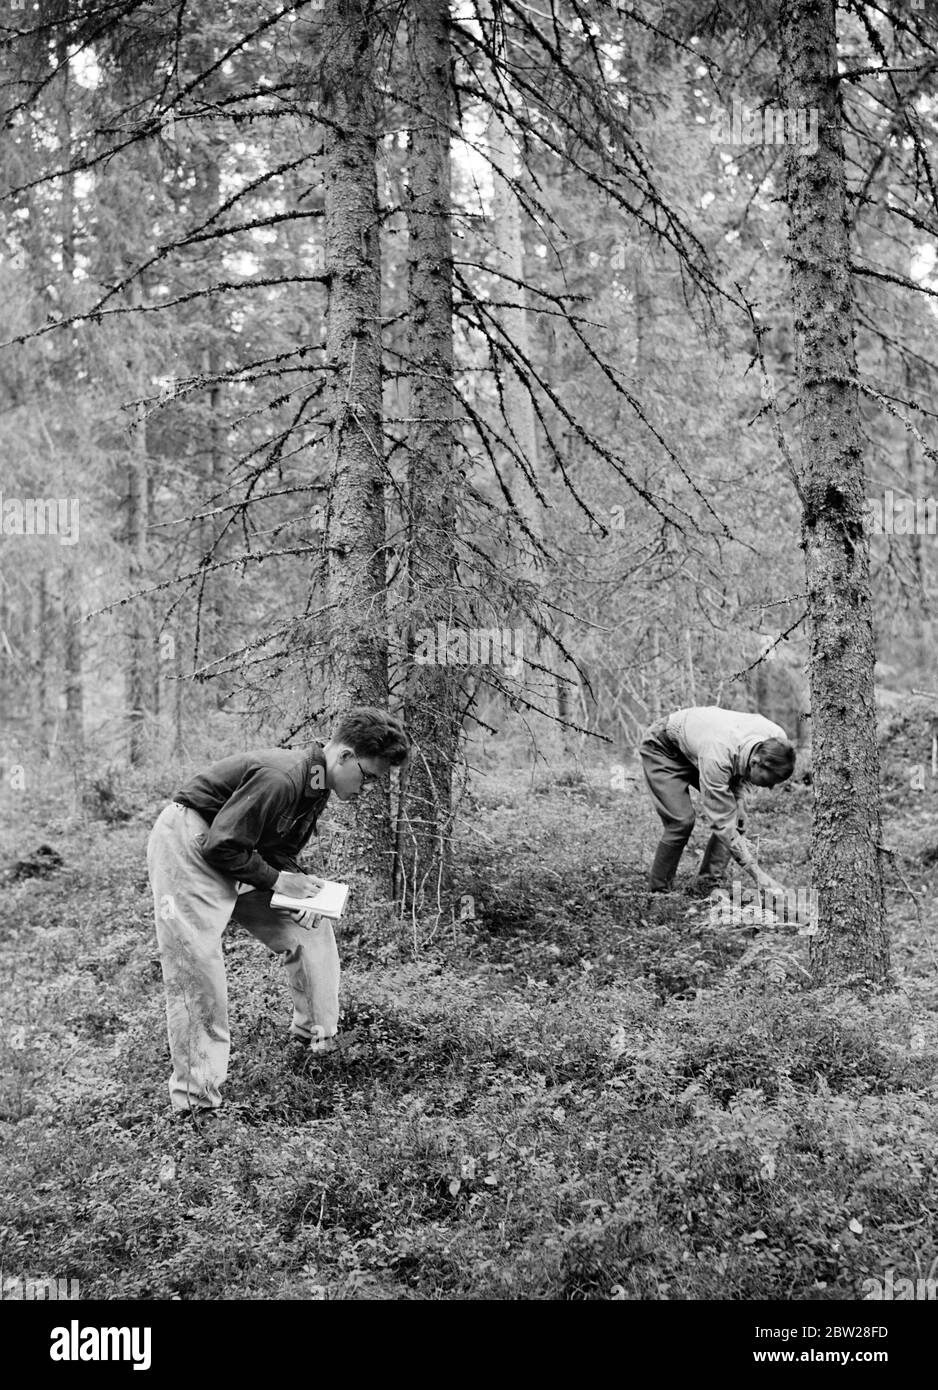 Worlds greatest foresters. Finland - Finnish daily life Forest Academy of Korkeakoski 1939 Nature guides them when they determine what trees are best suited for the soil. From a series These Men Built the Mannerheim Line - the Finnish zone of frontier fortifications was designed and constructed entirely by the Finnish people. Finnish engineers began work on the line in 1937 but it was not until this summer in 1939 that the work was speeded up and completed. Then, conscious of the dangers of a weak frontier, Finnish young men and students gave up their summer holidays in order to help voluntari Stock Photo